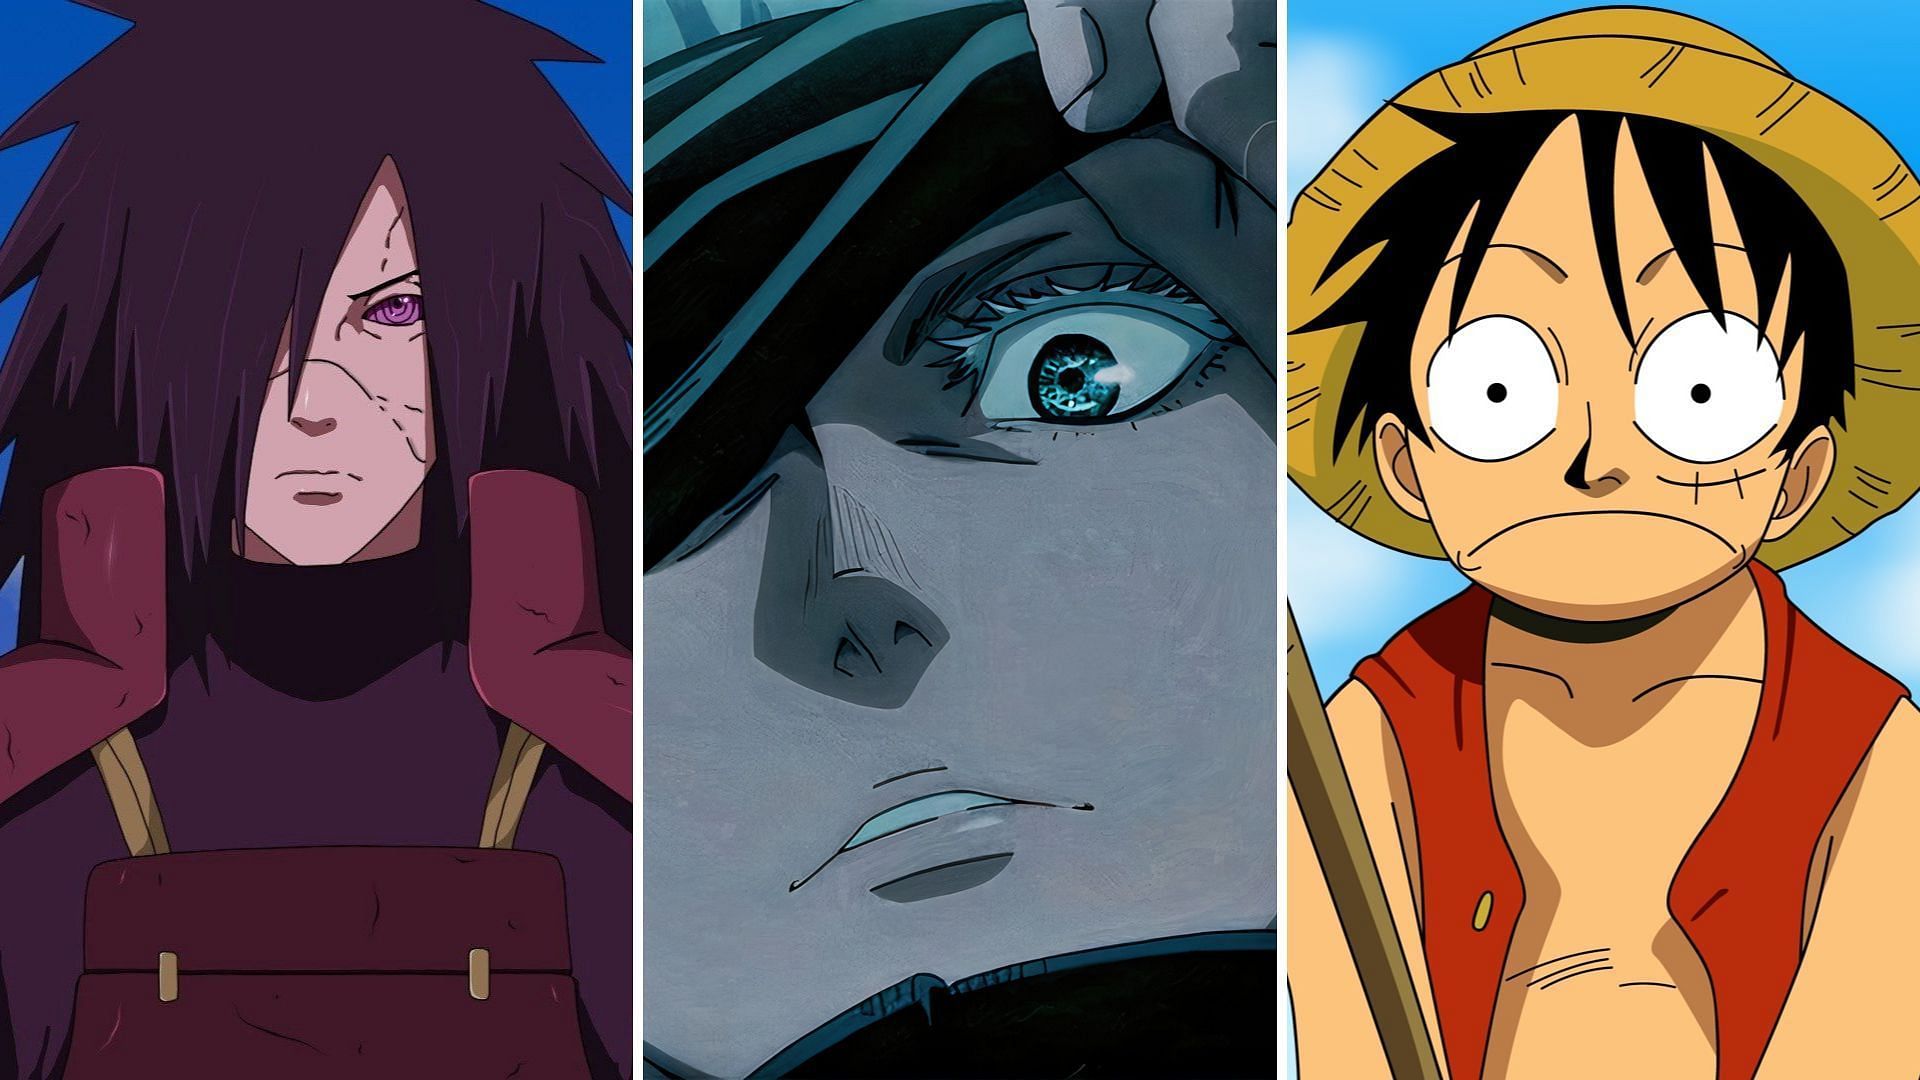 Can your favorite anime character beat Gojo? - Quora